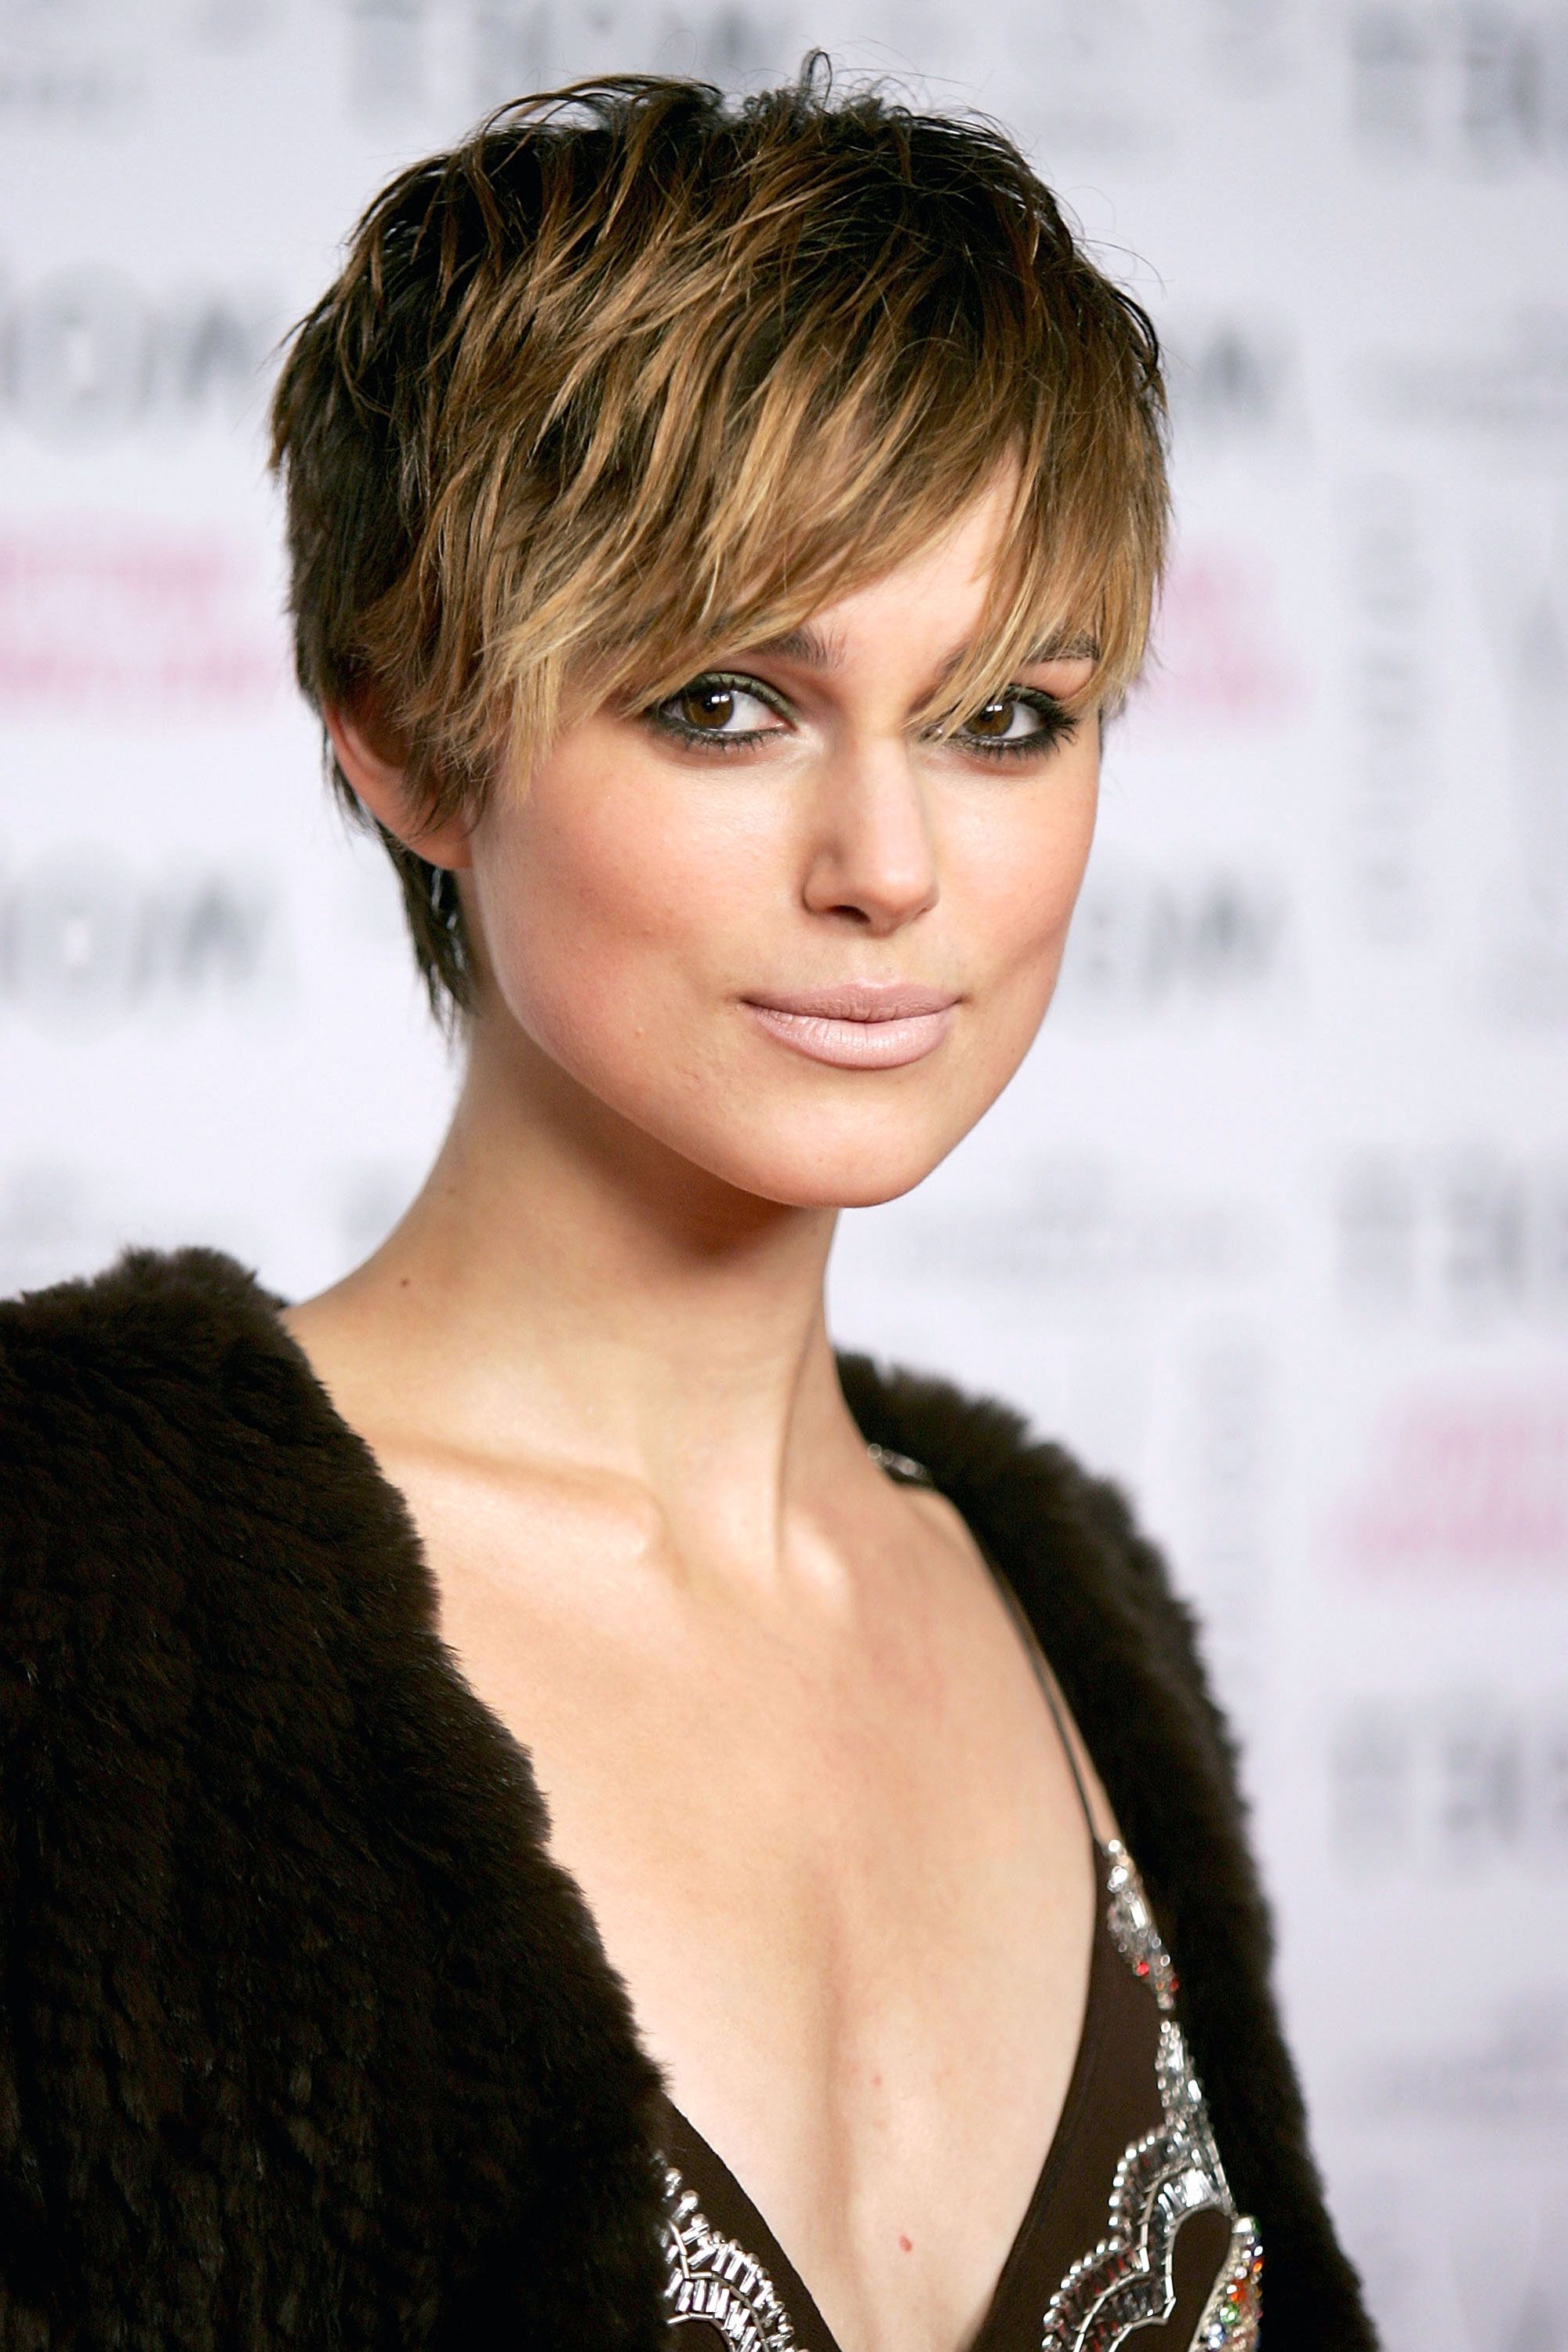 50+ Pixie Cuts We Love For 2018 – Short Pixie Hairstyles From Inside Short Hairstyles With Bangs (View 9 of 25)